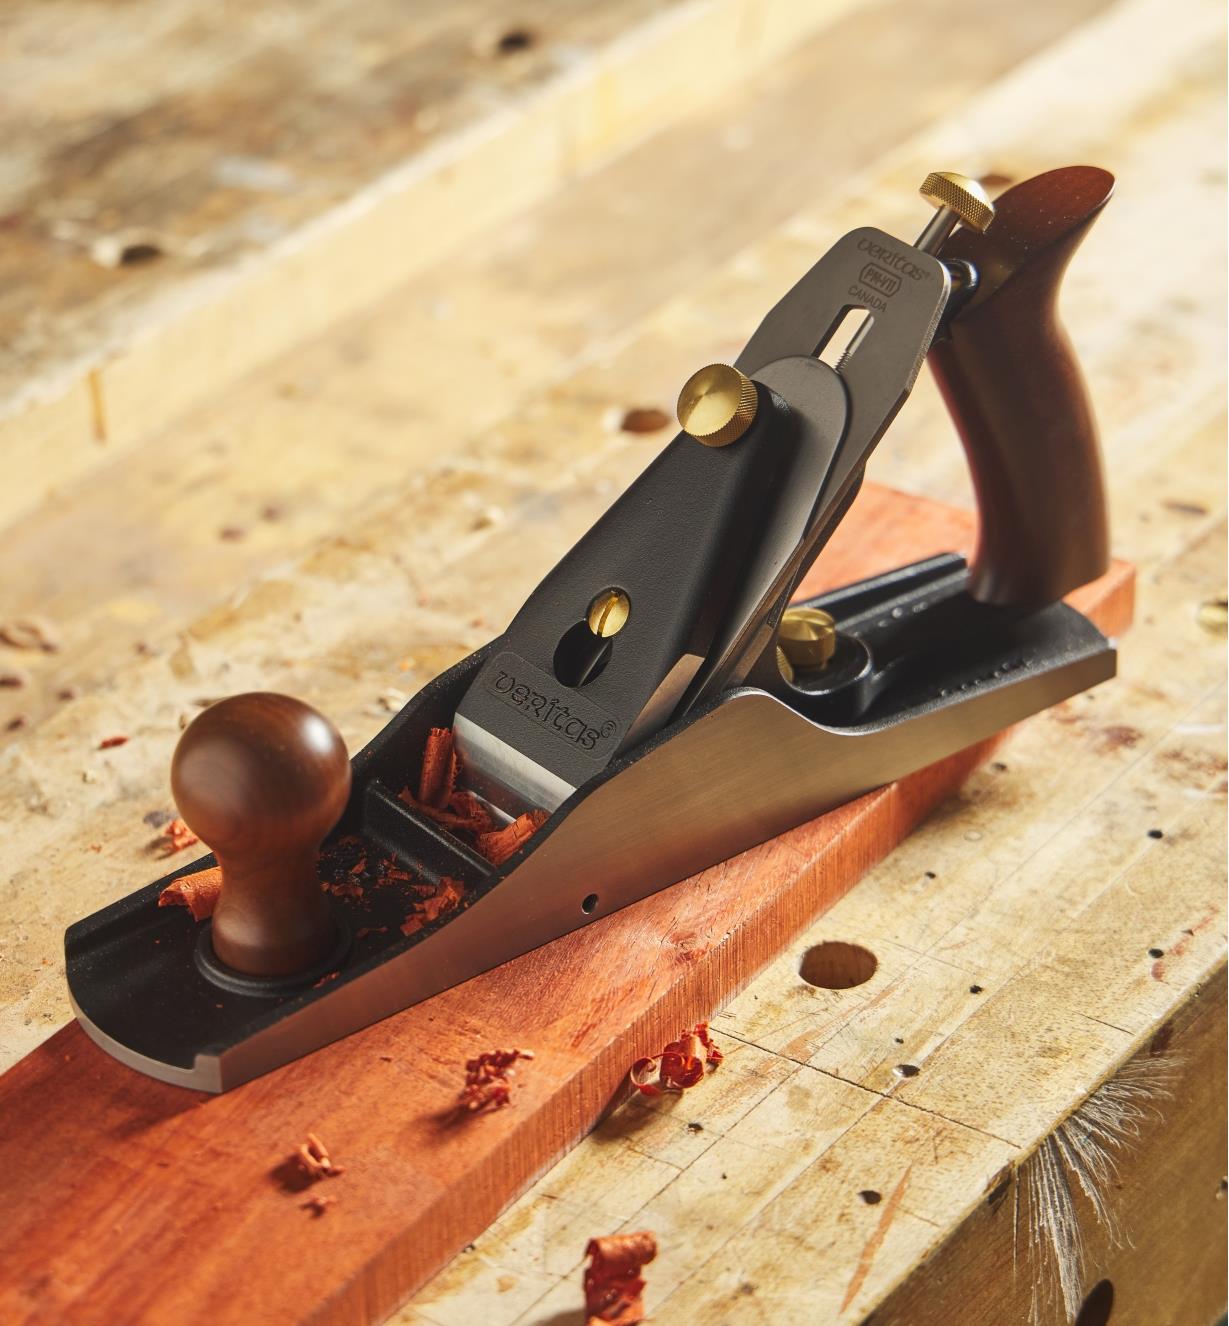 A Veritas #5 1/4W bench plane used to plane a wooden board